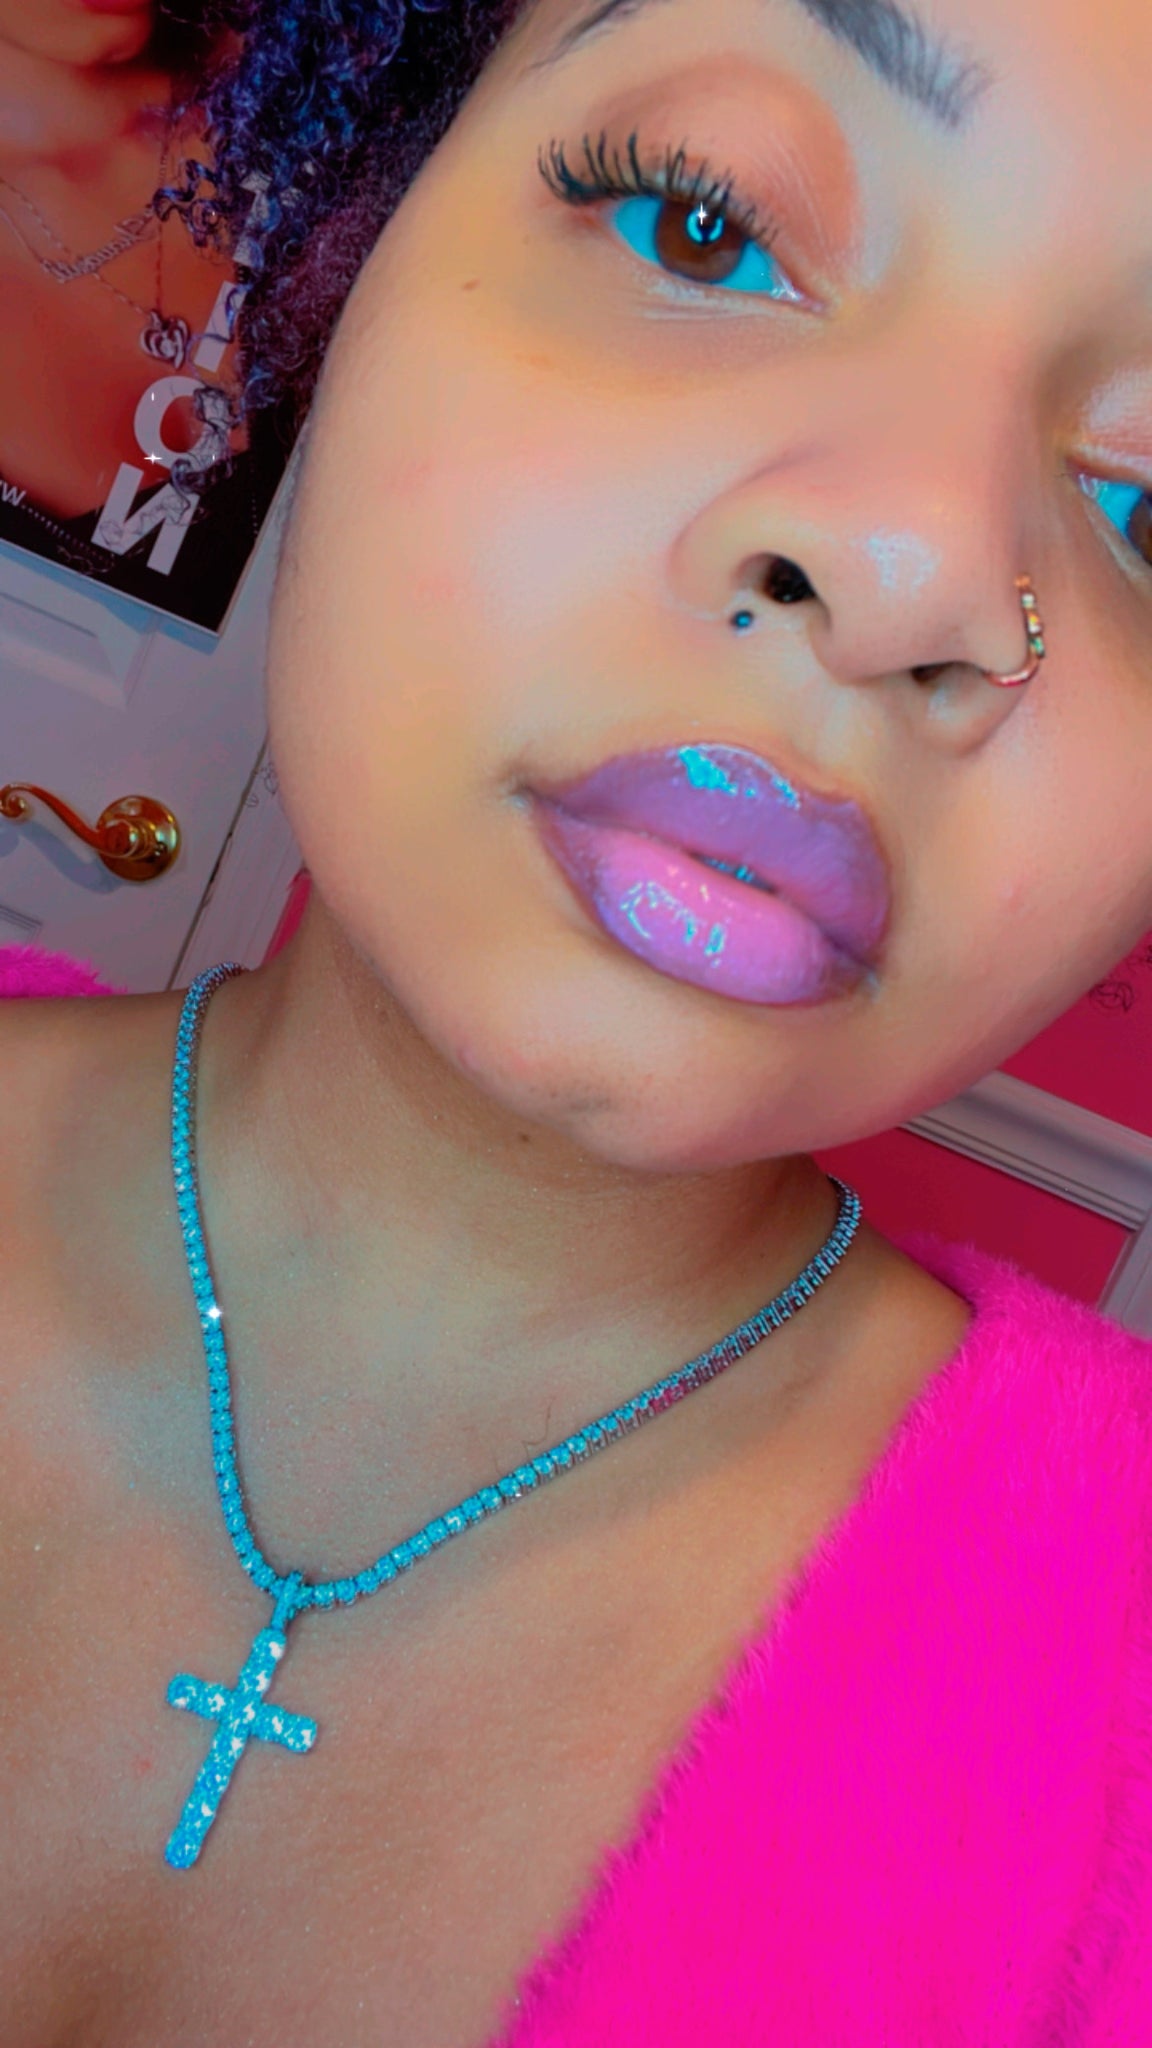 “Blueberry Cheesecake” Lip Frosting